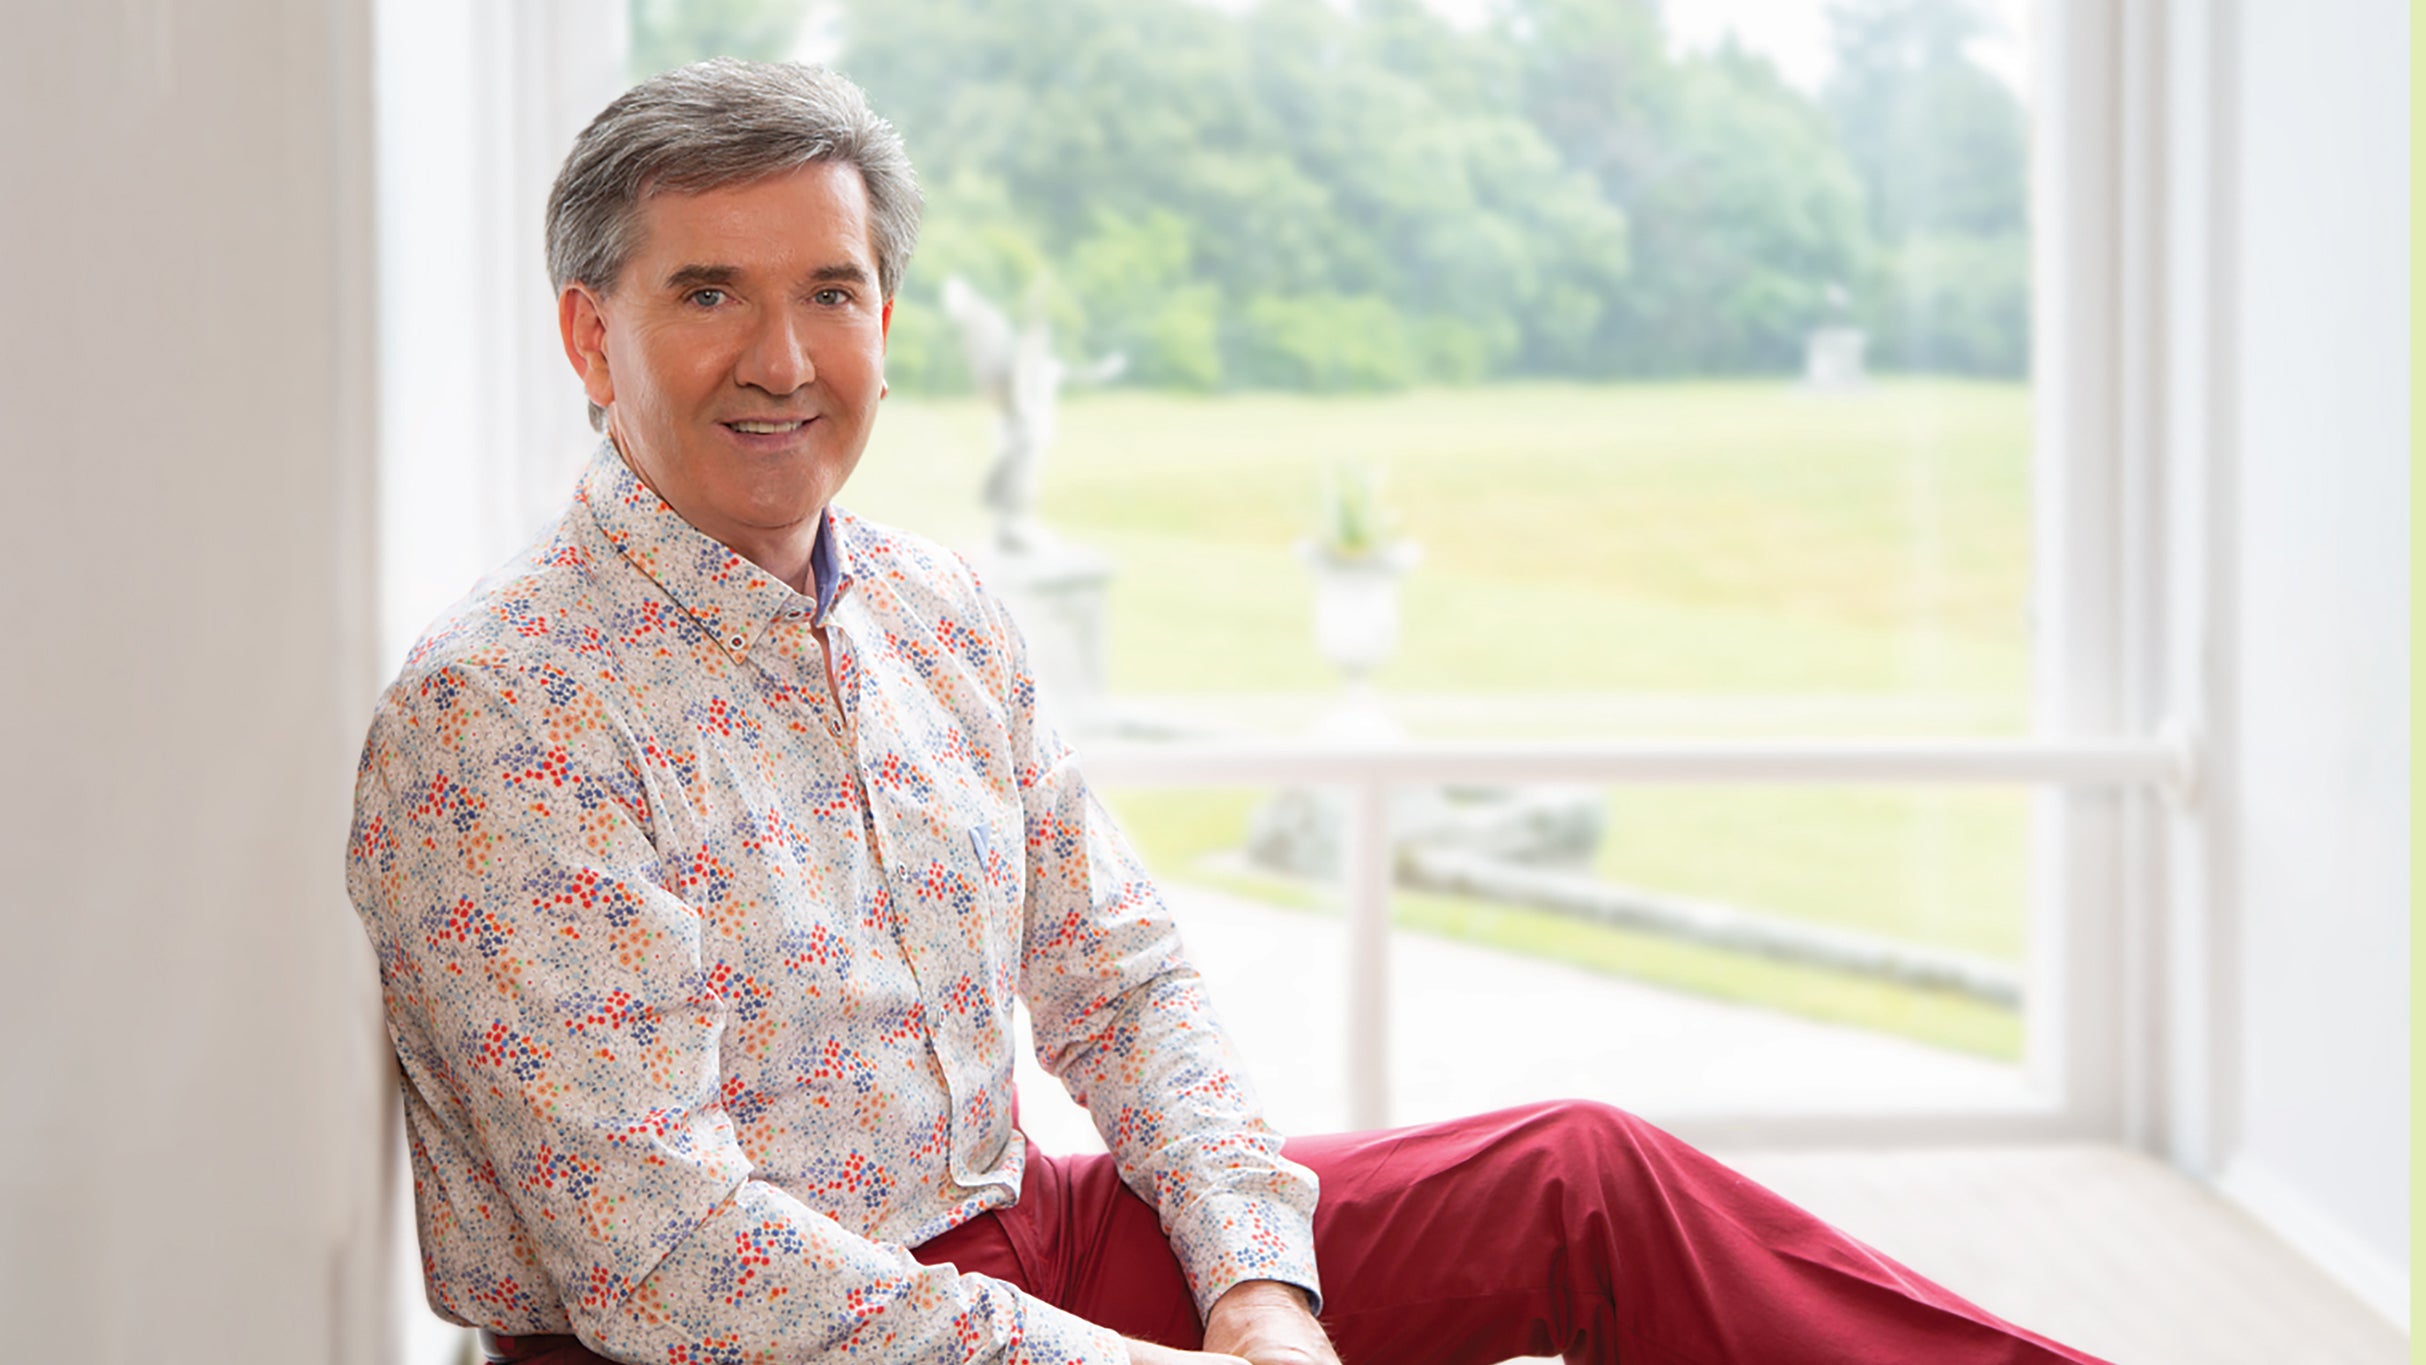 Daniel O'Donnell at Cofrin Family Hall